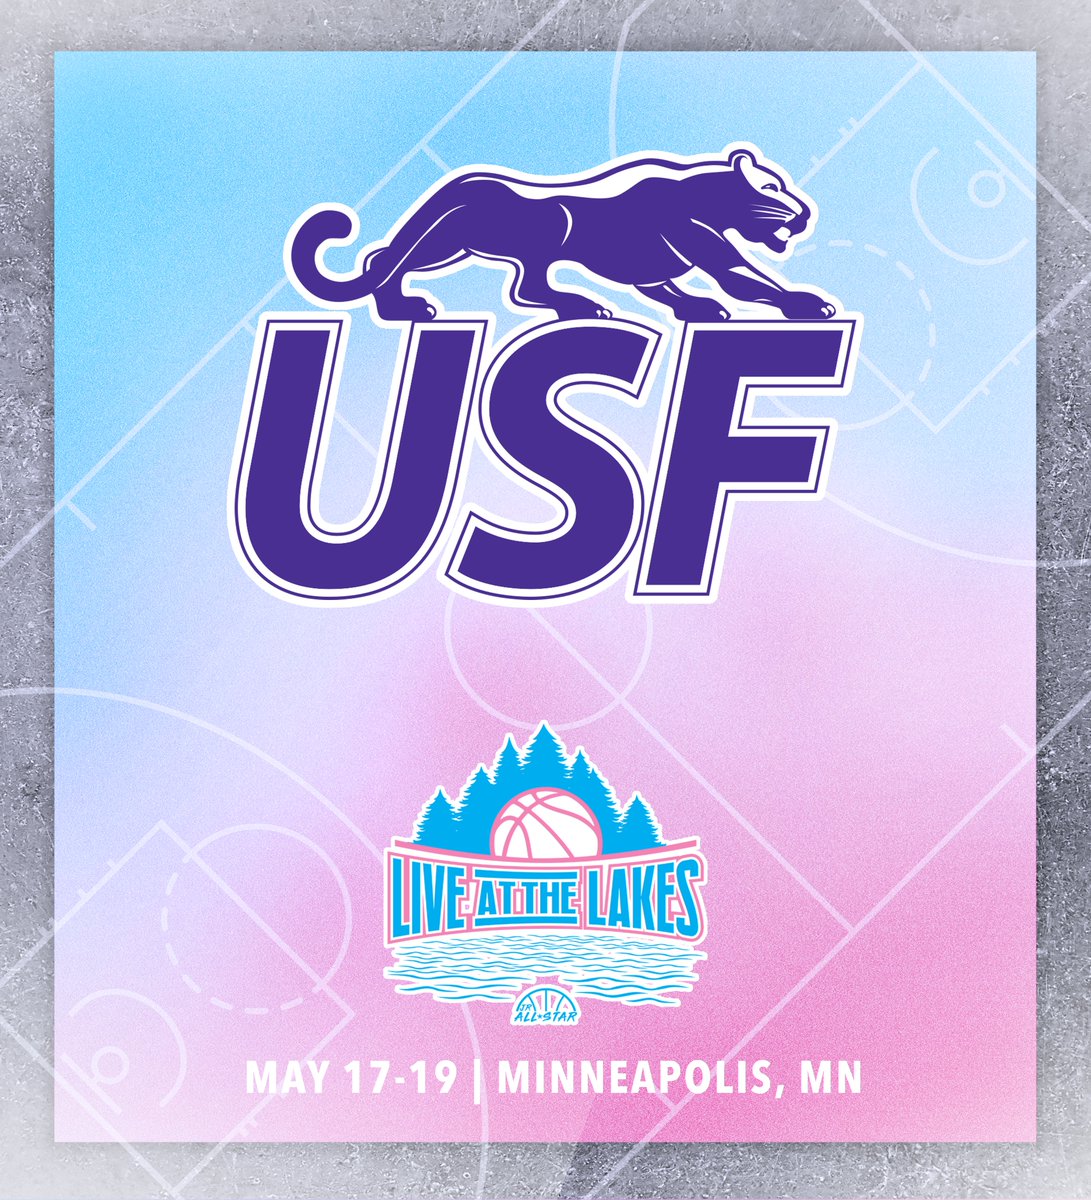 The University of Sioux Falls (@USFCougarsWBB) will be at 𝗟𝗜𝗩𝗘 𝗔𝗧 𝗧𝗛𝗘 𝗟𝗔𝗞𝗘𝗦! Don’t miss out on the action in Minnesota, where some of the nation’s top talent will go head-to-head. Register now! 🤩 jrallstar.com/exposure-event…